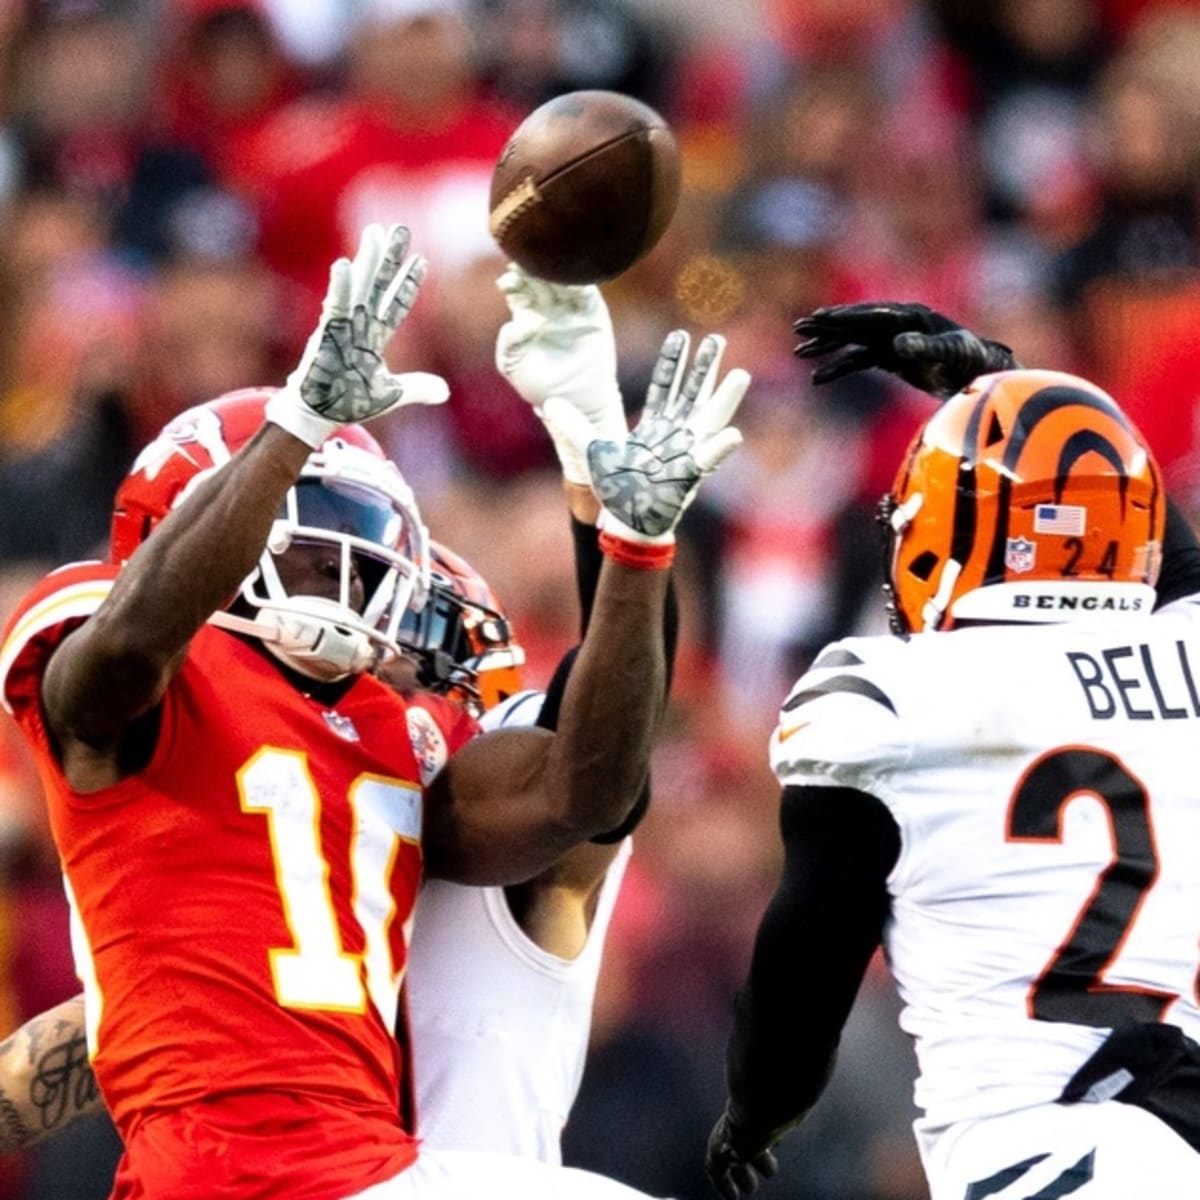 Bengals defense vs Chiefs' Tyreek Hill in AFC Championship